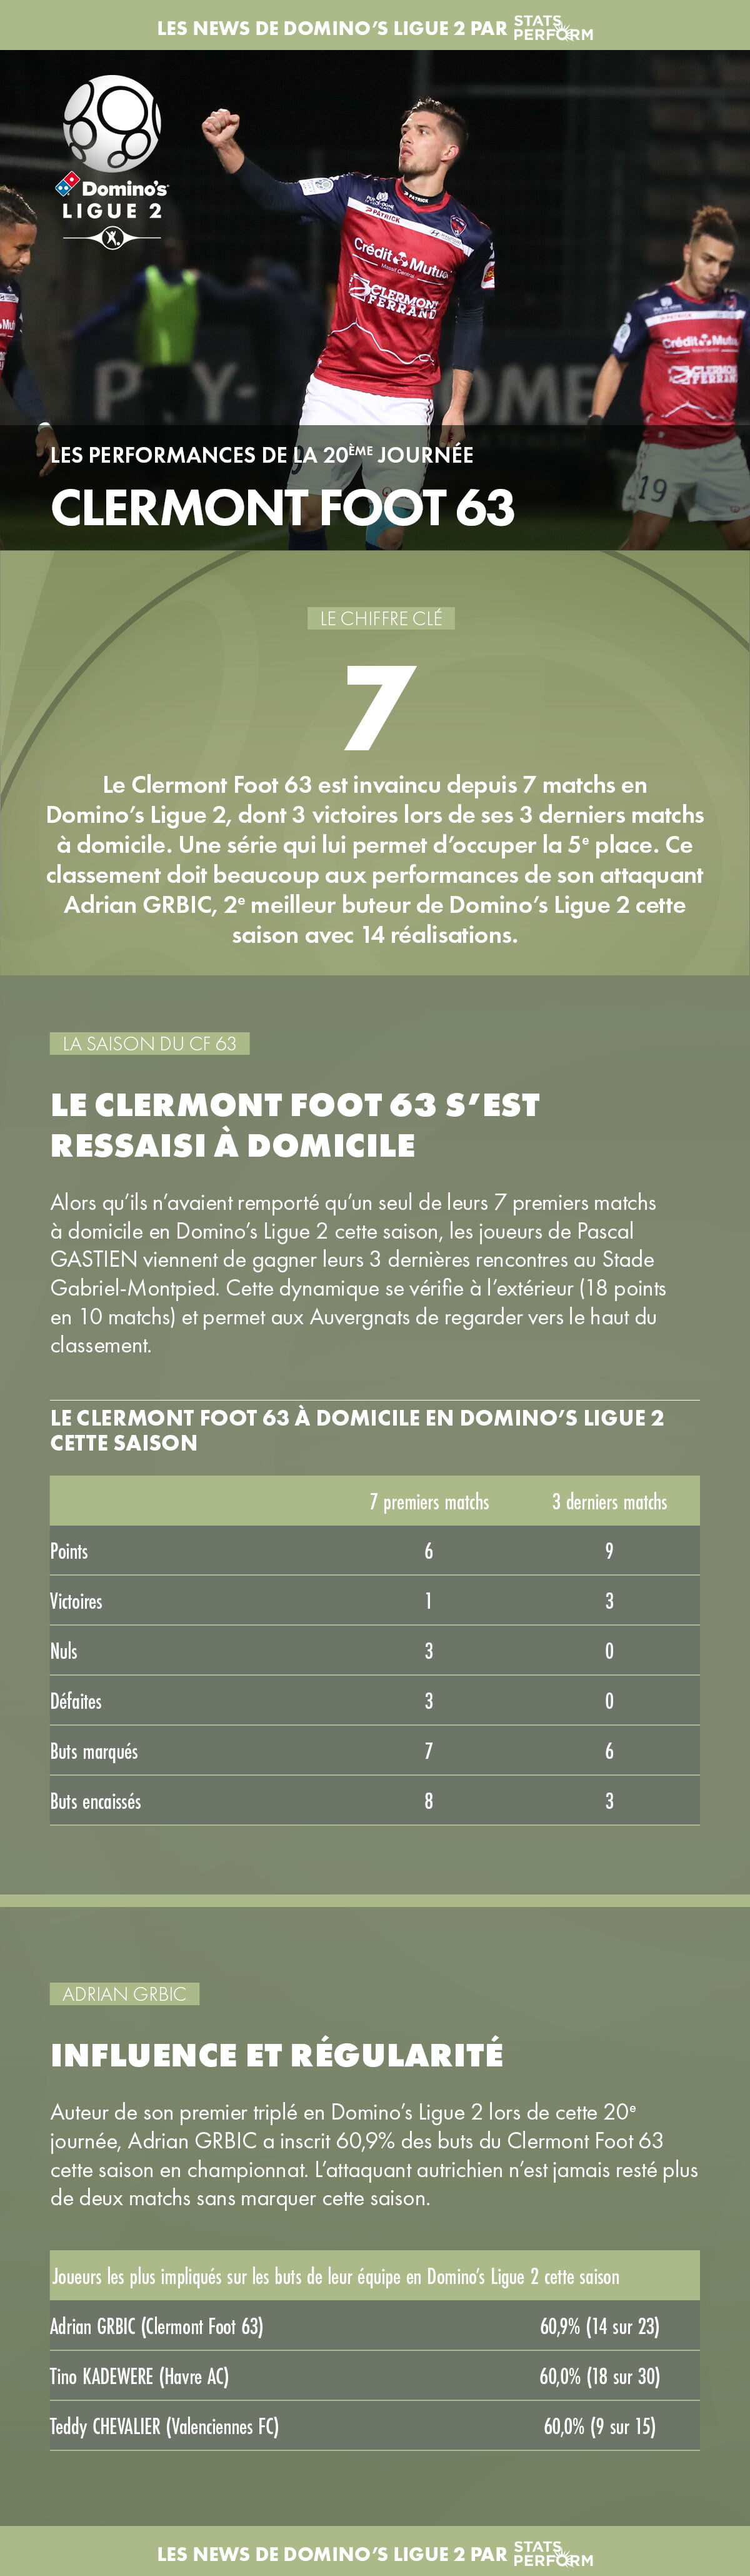 Newsletter J20 Domino's Ligue 2 post-match Clermont